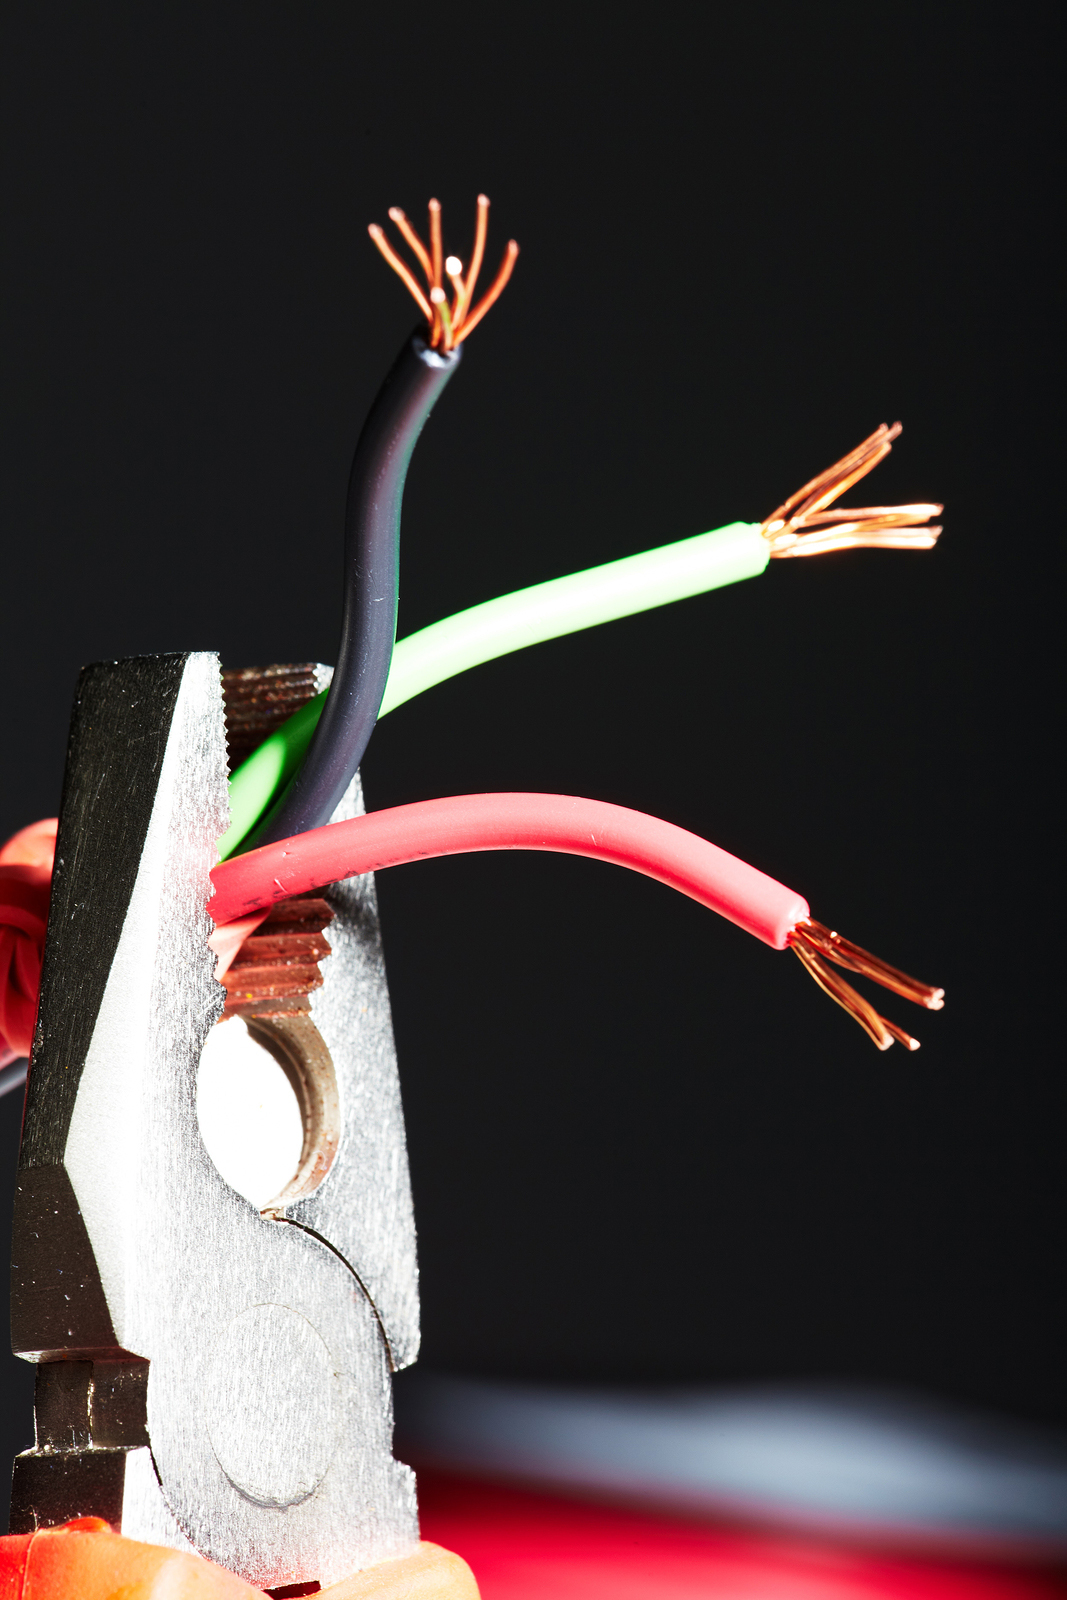 The Different Colored Electrical Wires Explained